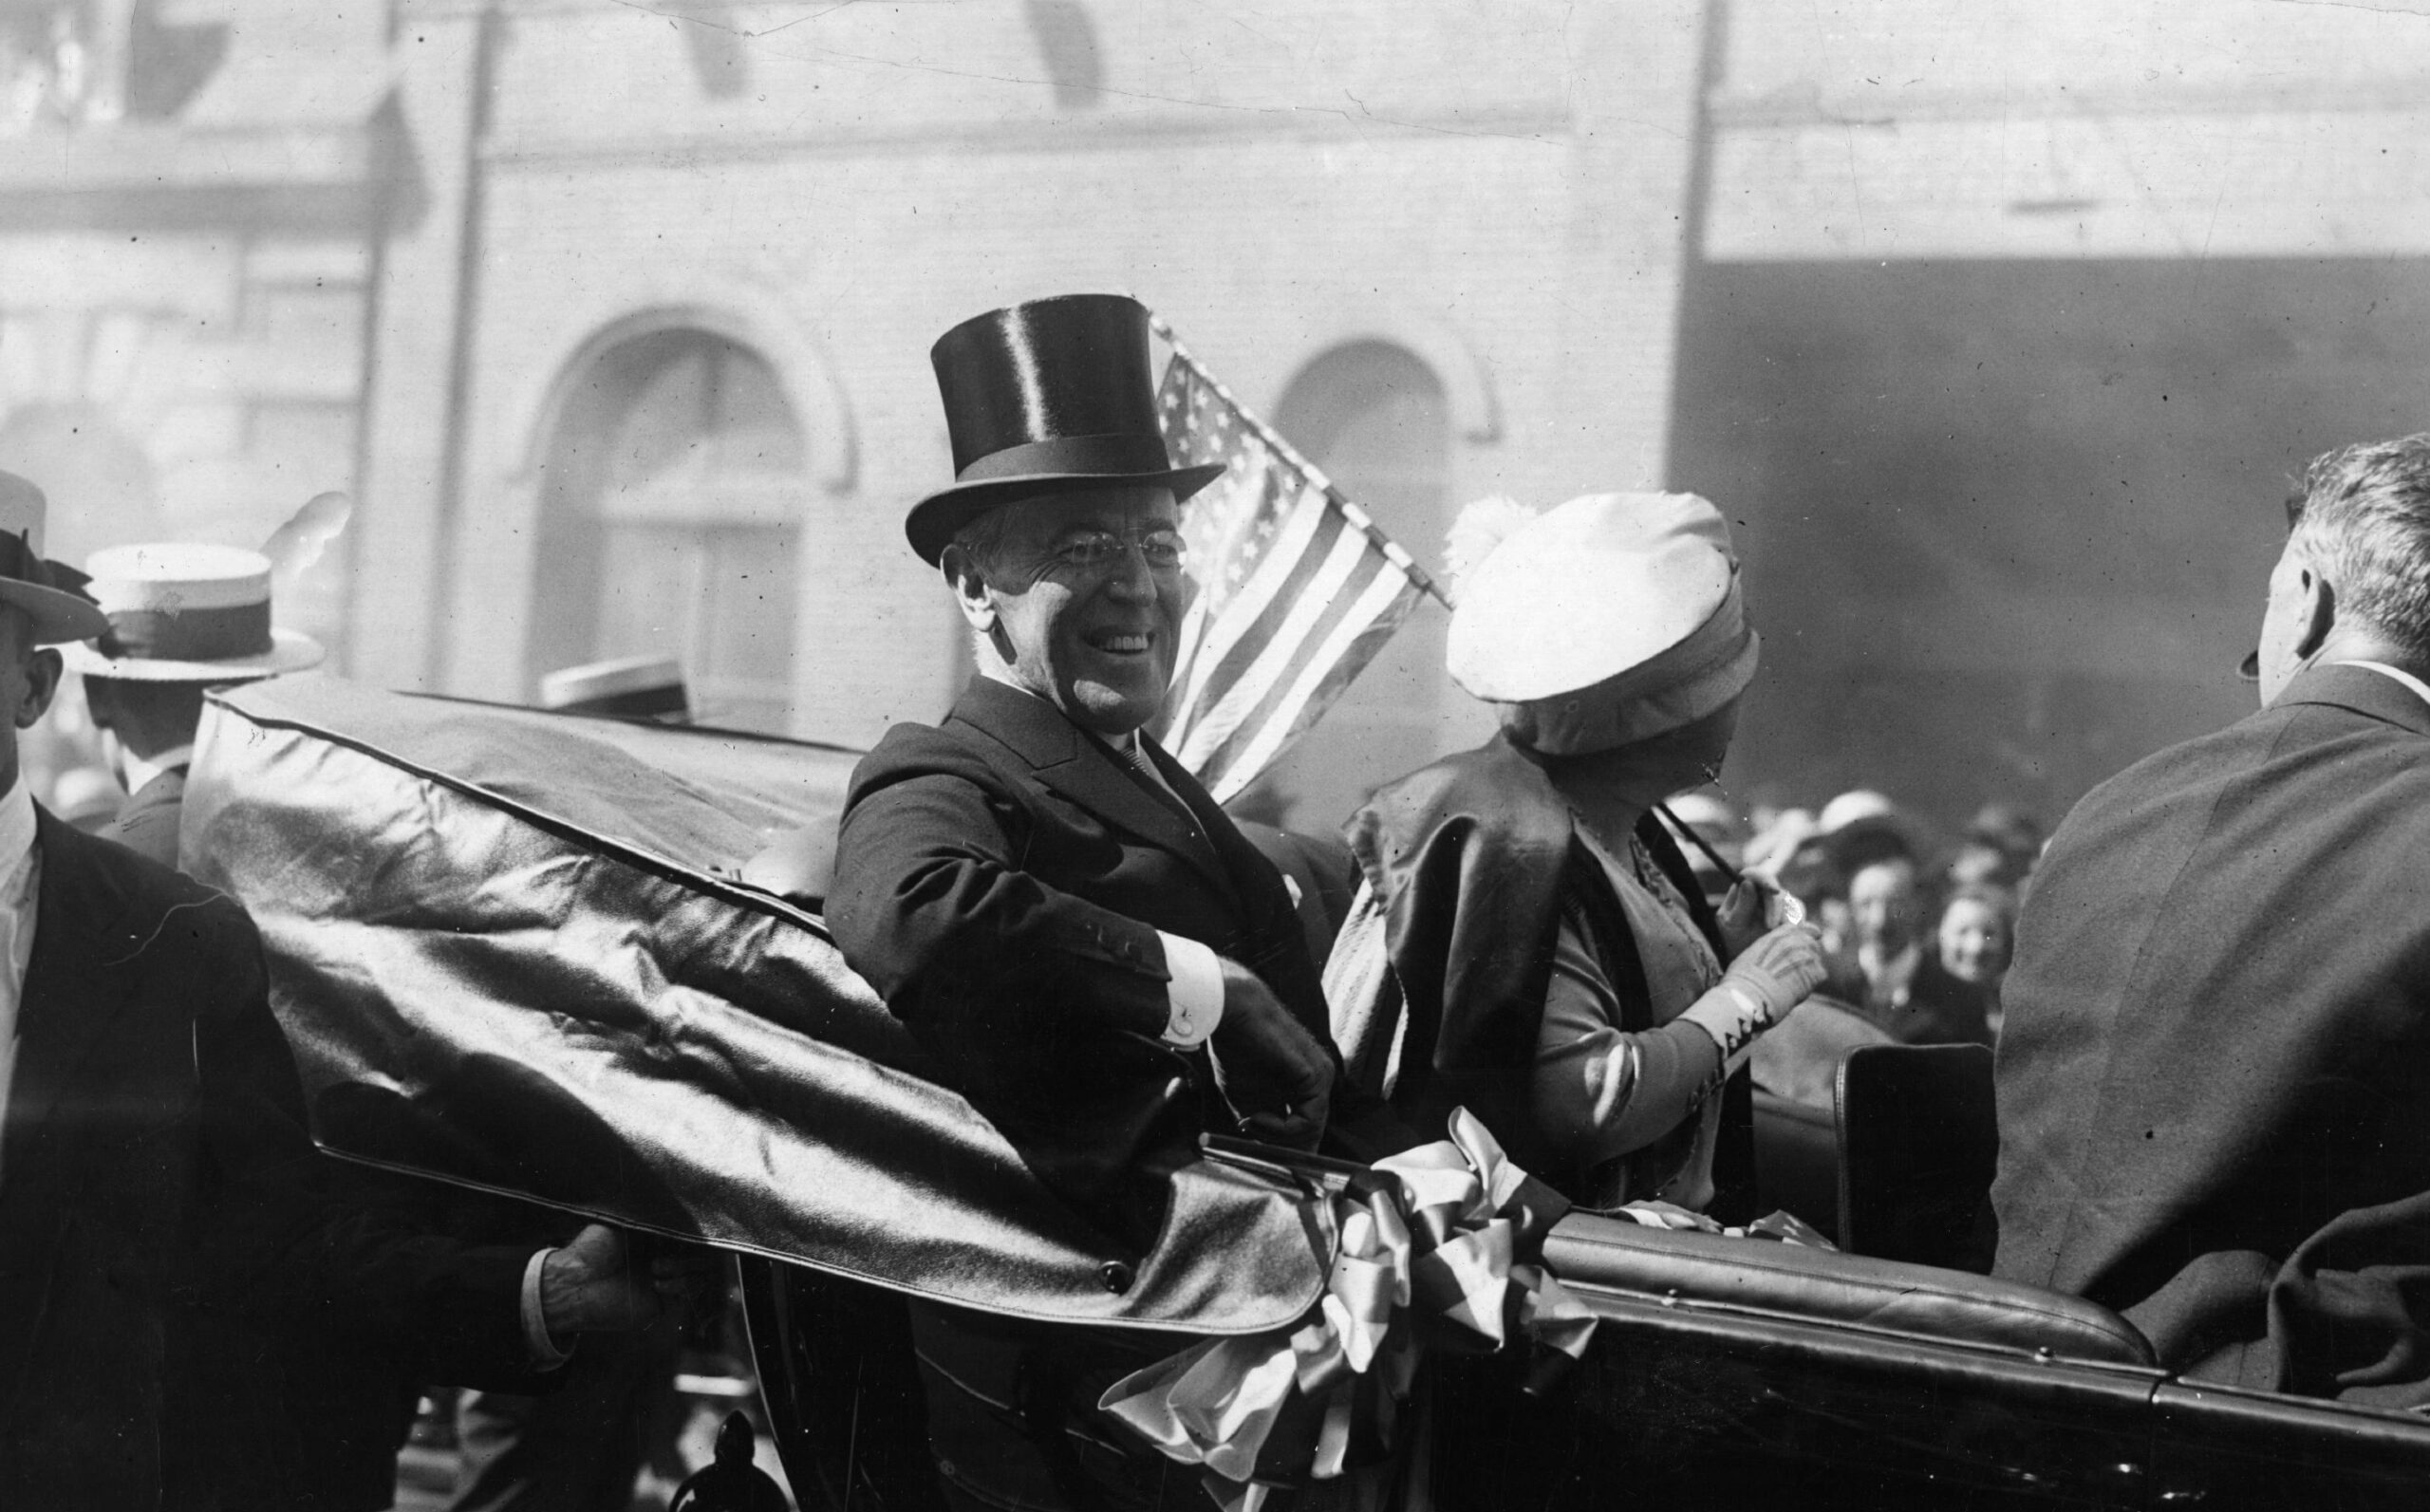 President Woodrow Wilson with First Lady Edith Wilson riding in a carriage in New York. Original Publication: People Disc - HK0484 (Photo by Hulton Archive/Getty Images)